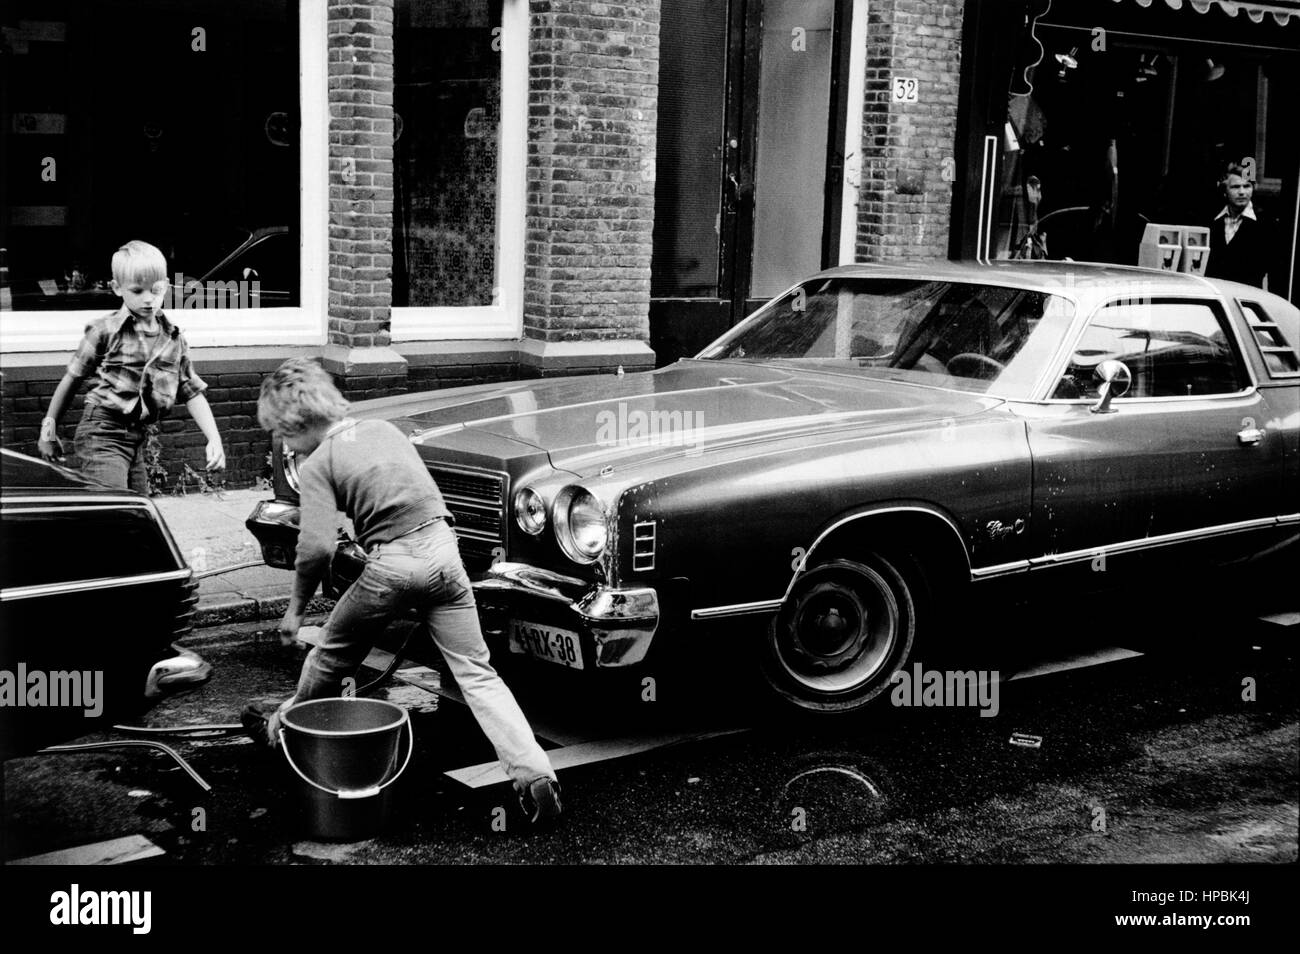 AJAXNETPHOTO. 1979. SCHEVENINGEN, HOLLAND. - CAR WASH - YOUNGSTERS CLEANING CARS IN THE STREET.  PHOTO:JONATHAN EASTLAND/AJAX  REF:CAR 79 Stock Photo